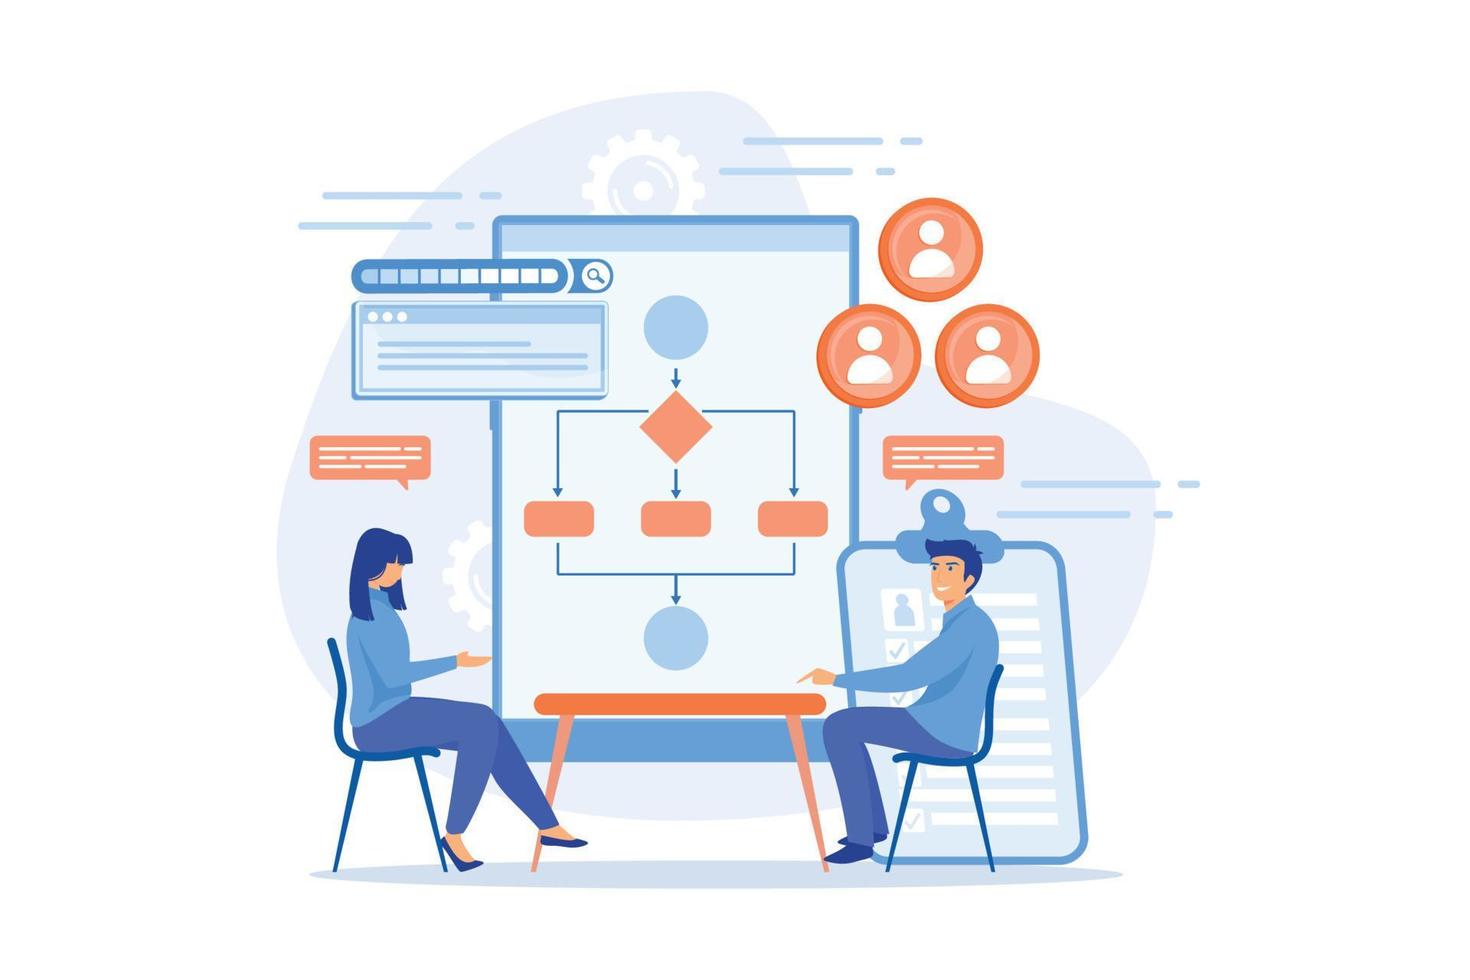 HR manager with employee at interview and business flow chart. Employee assessment software, HR company system, employee check programme concept, flat vector modern illustration